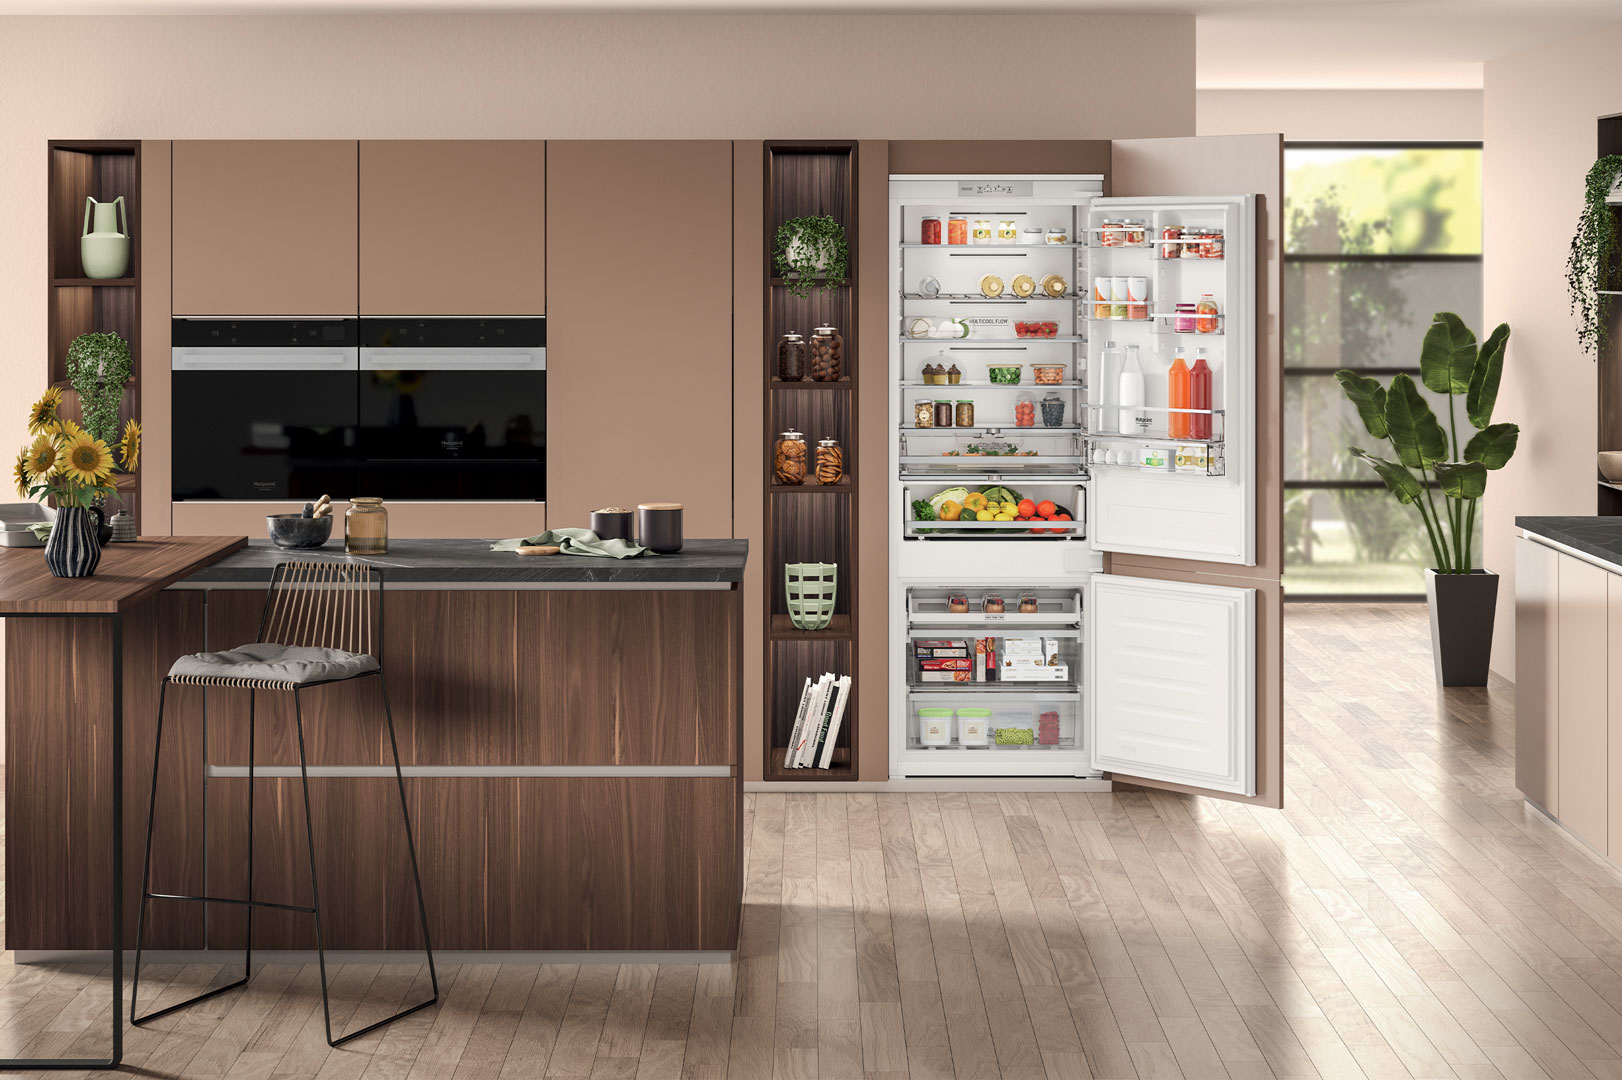 More space and freshness with the Space 400 Total No Frost built-in fridge by Hotpoint